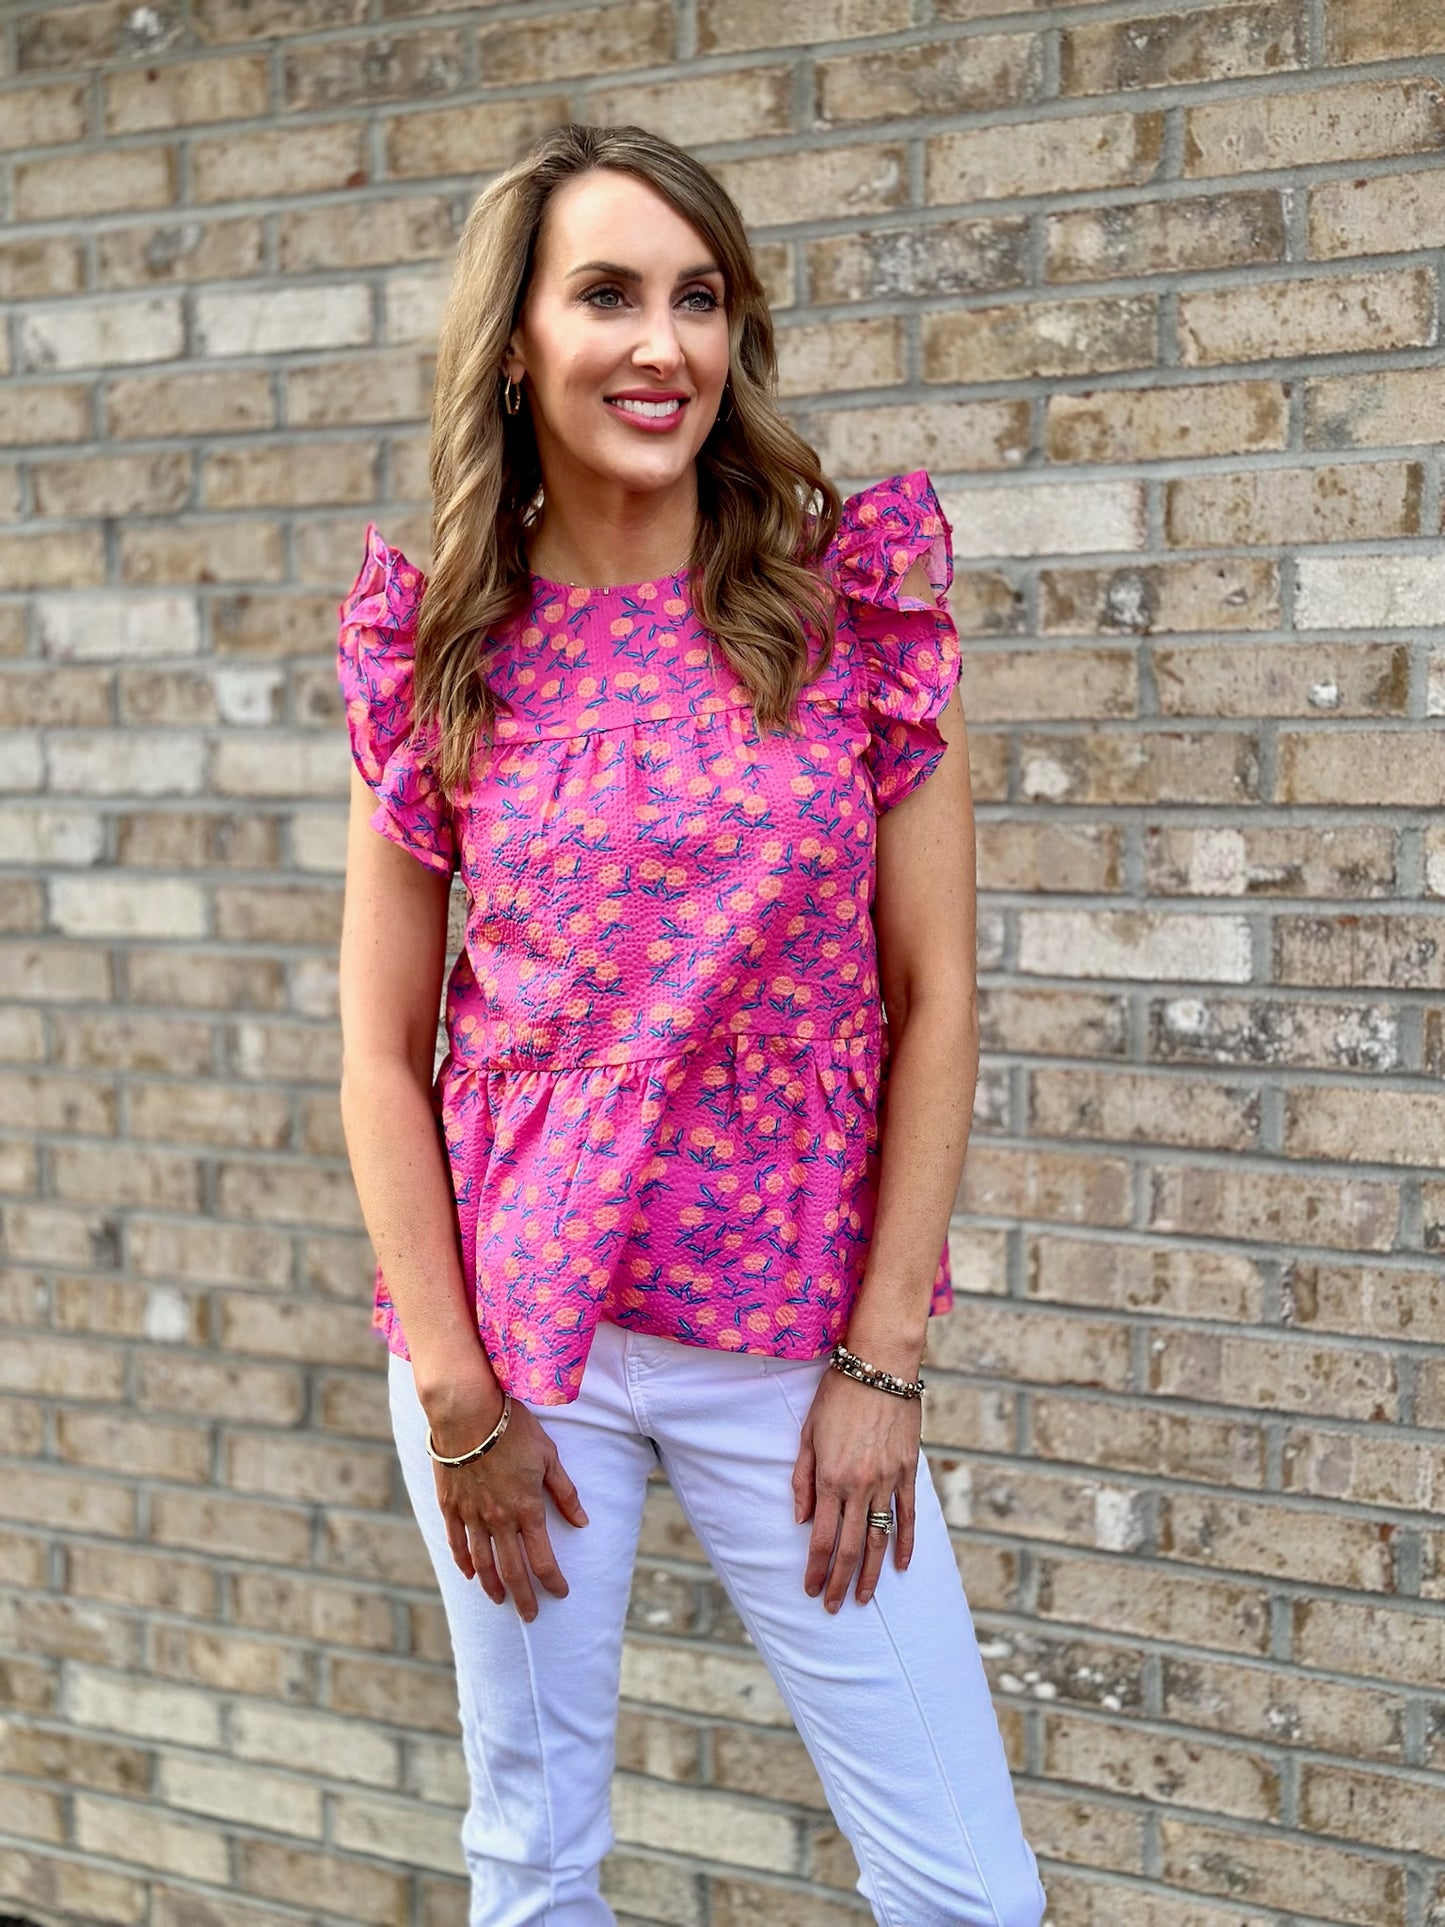 A timeless ruffle sleeve blouse that will never go out of style. Seersucker-like fabrication gives this pink floral top an adorable look for work or play. 